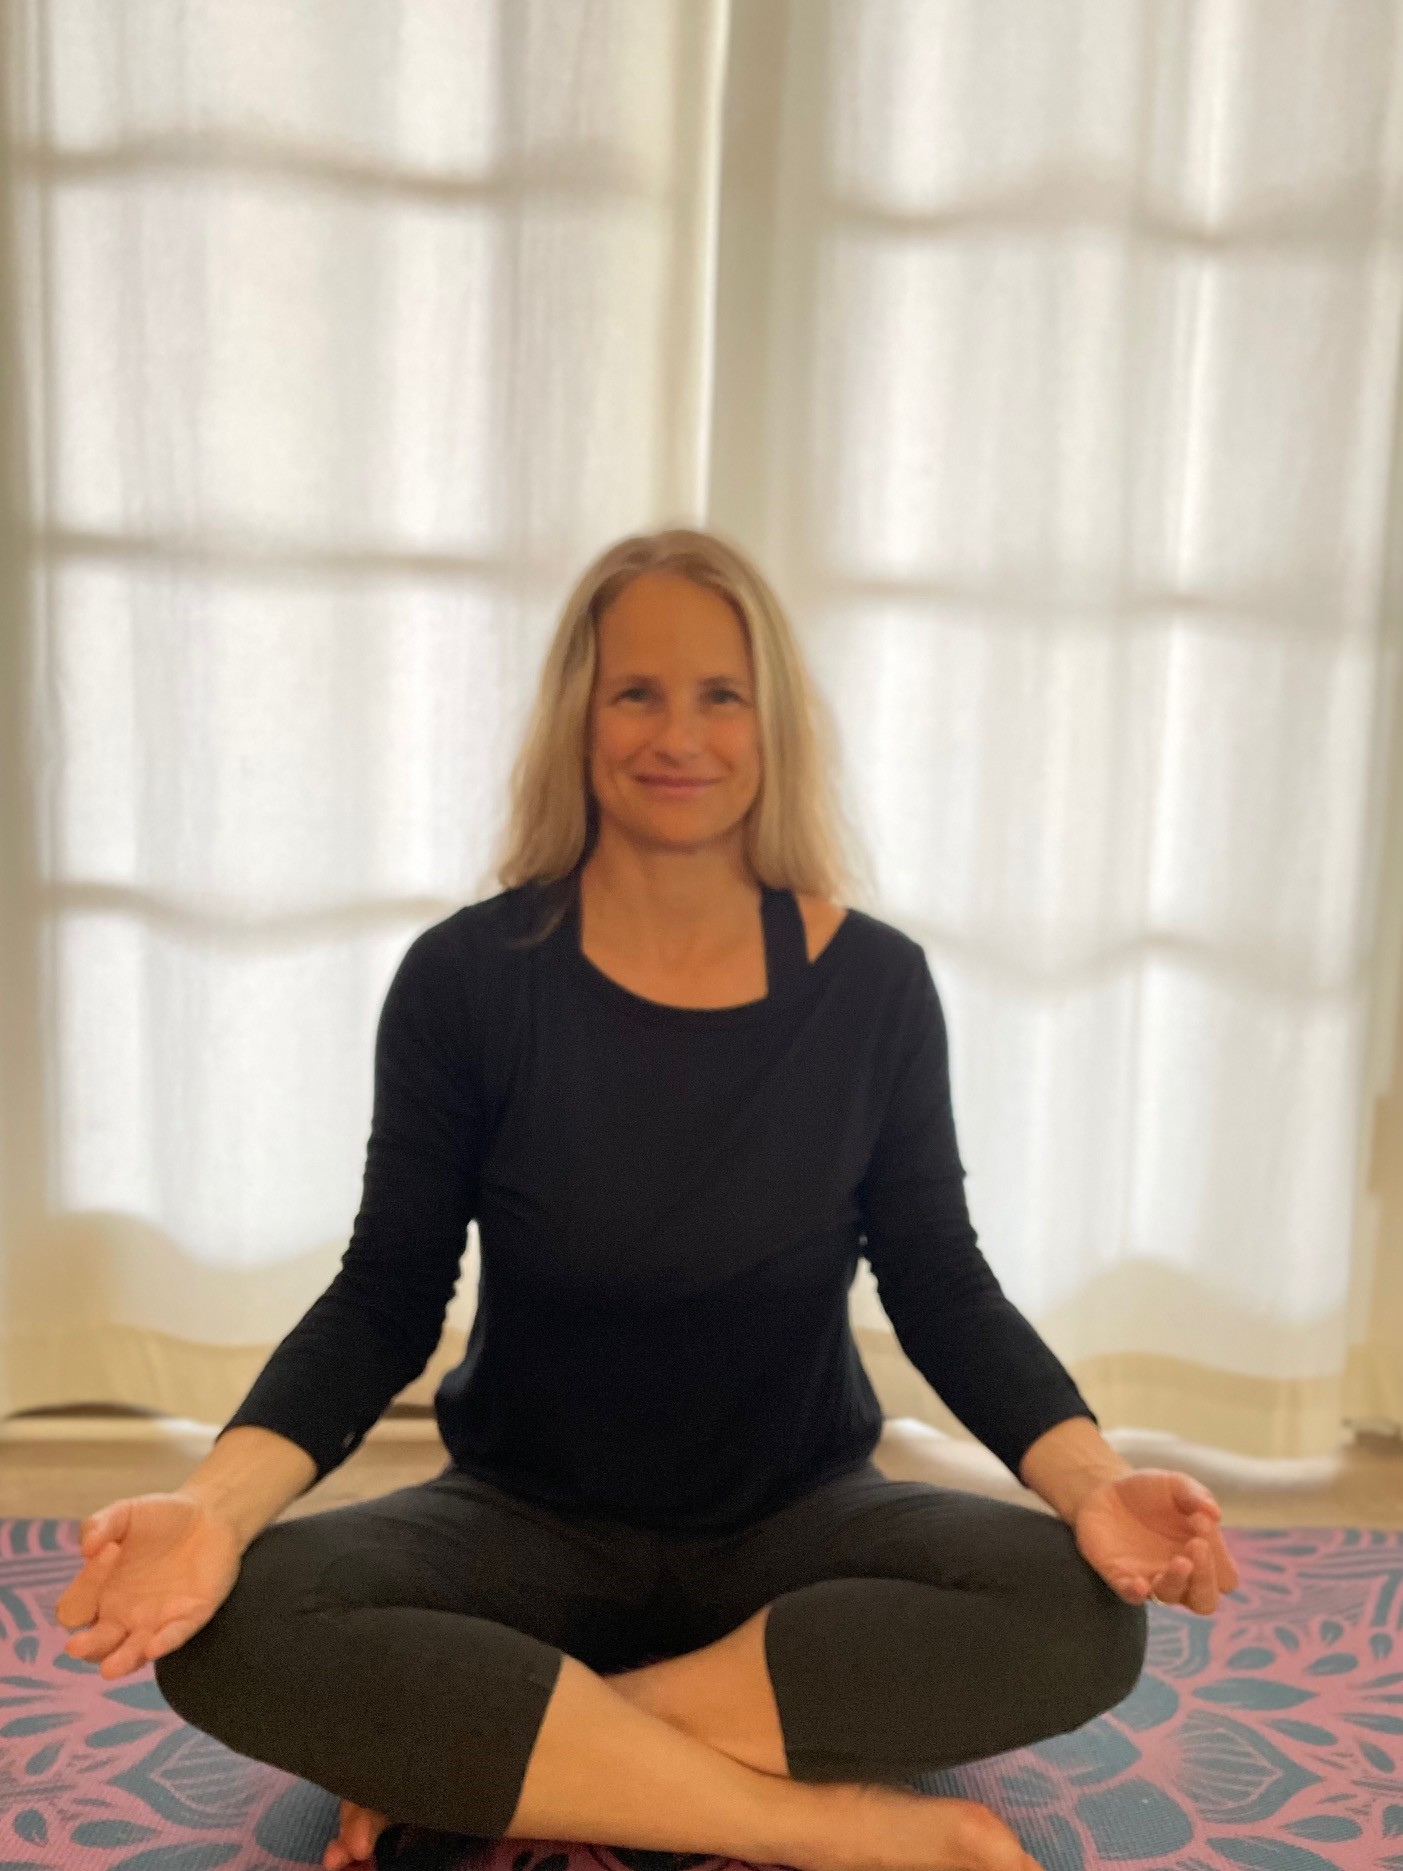 ASU doctoral studentRebecca Heller teaches students the value of mindfulness meditation and yoga at ViewPoint School in Calabasas, California.